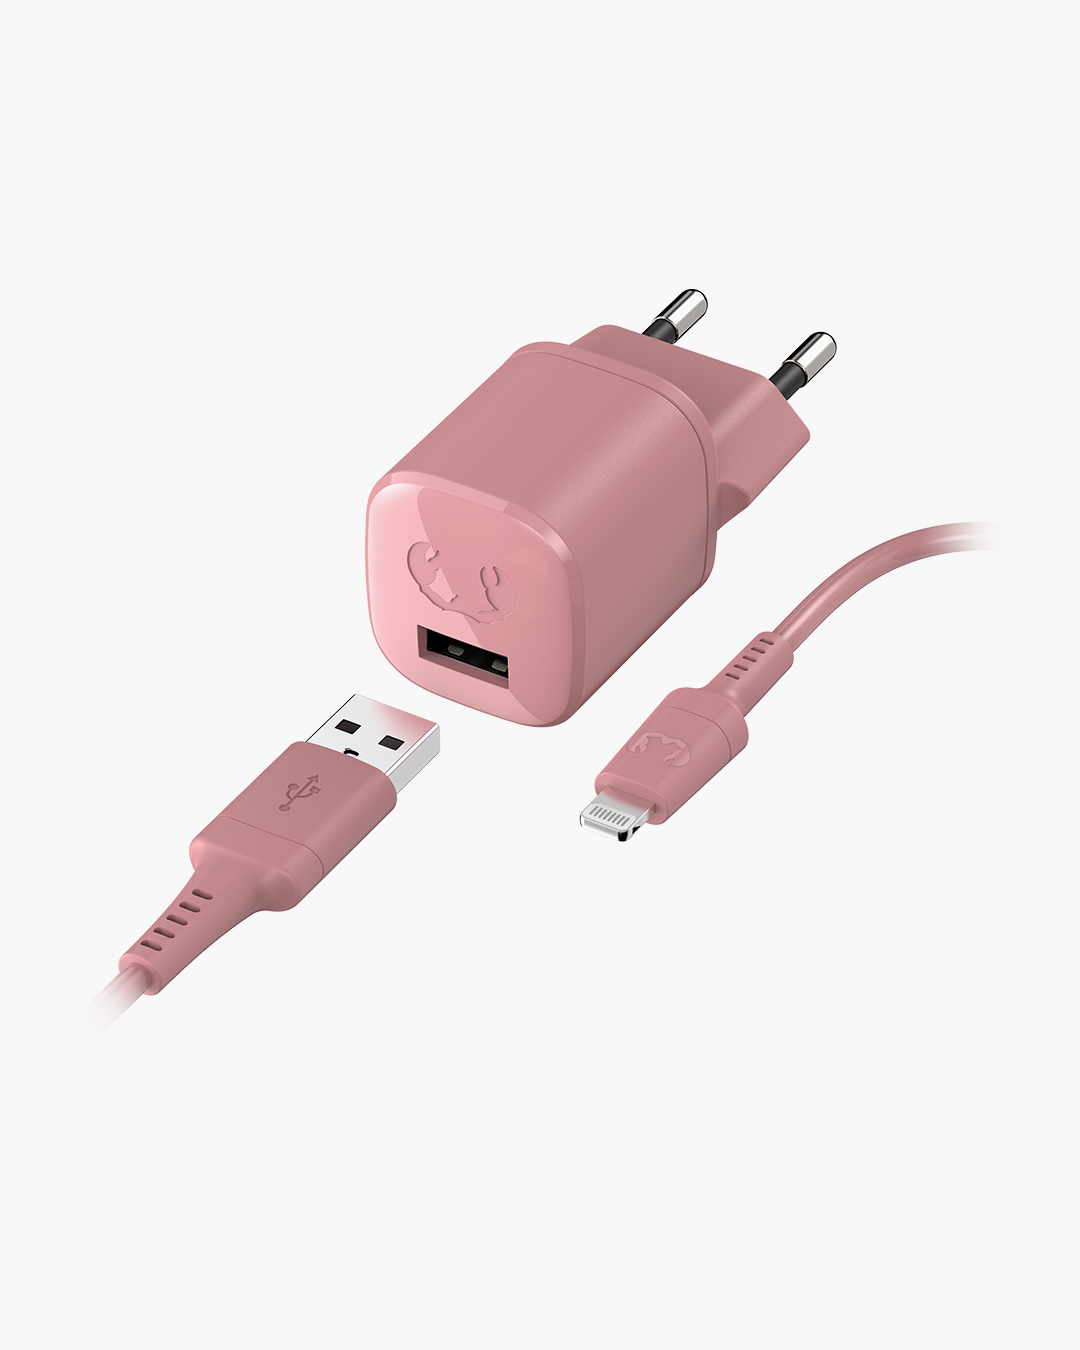 Fresh 'n Rebel - USB Mini Charger 12W + Apple Lightning Cable 1,5m - Dusty Pink